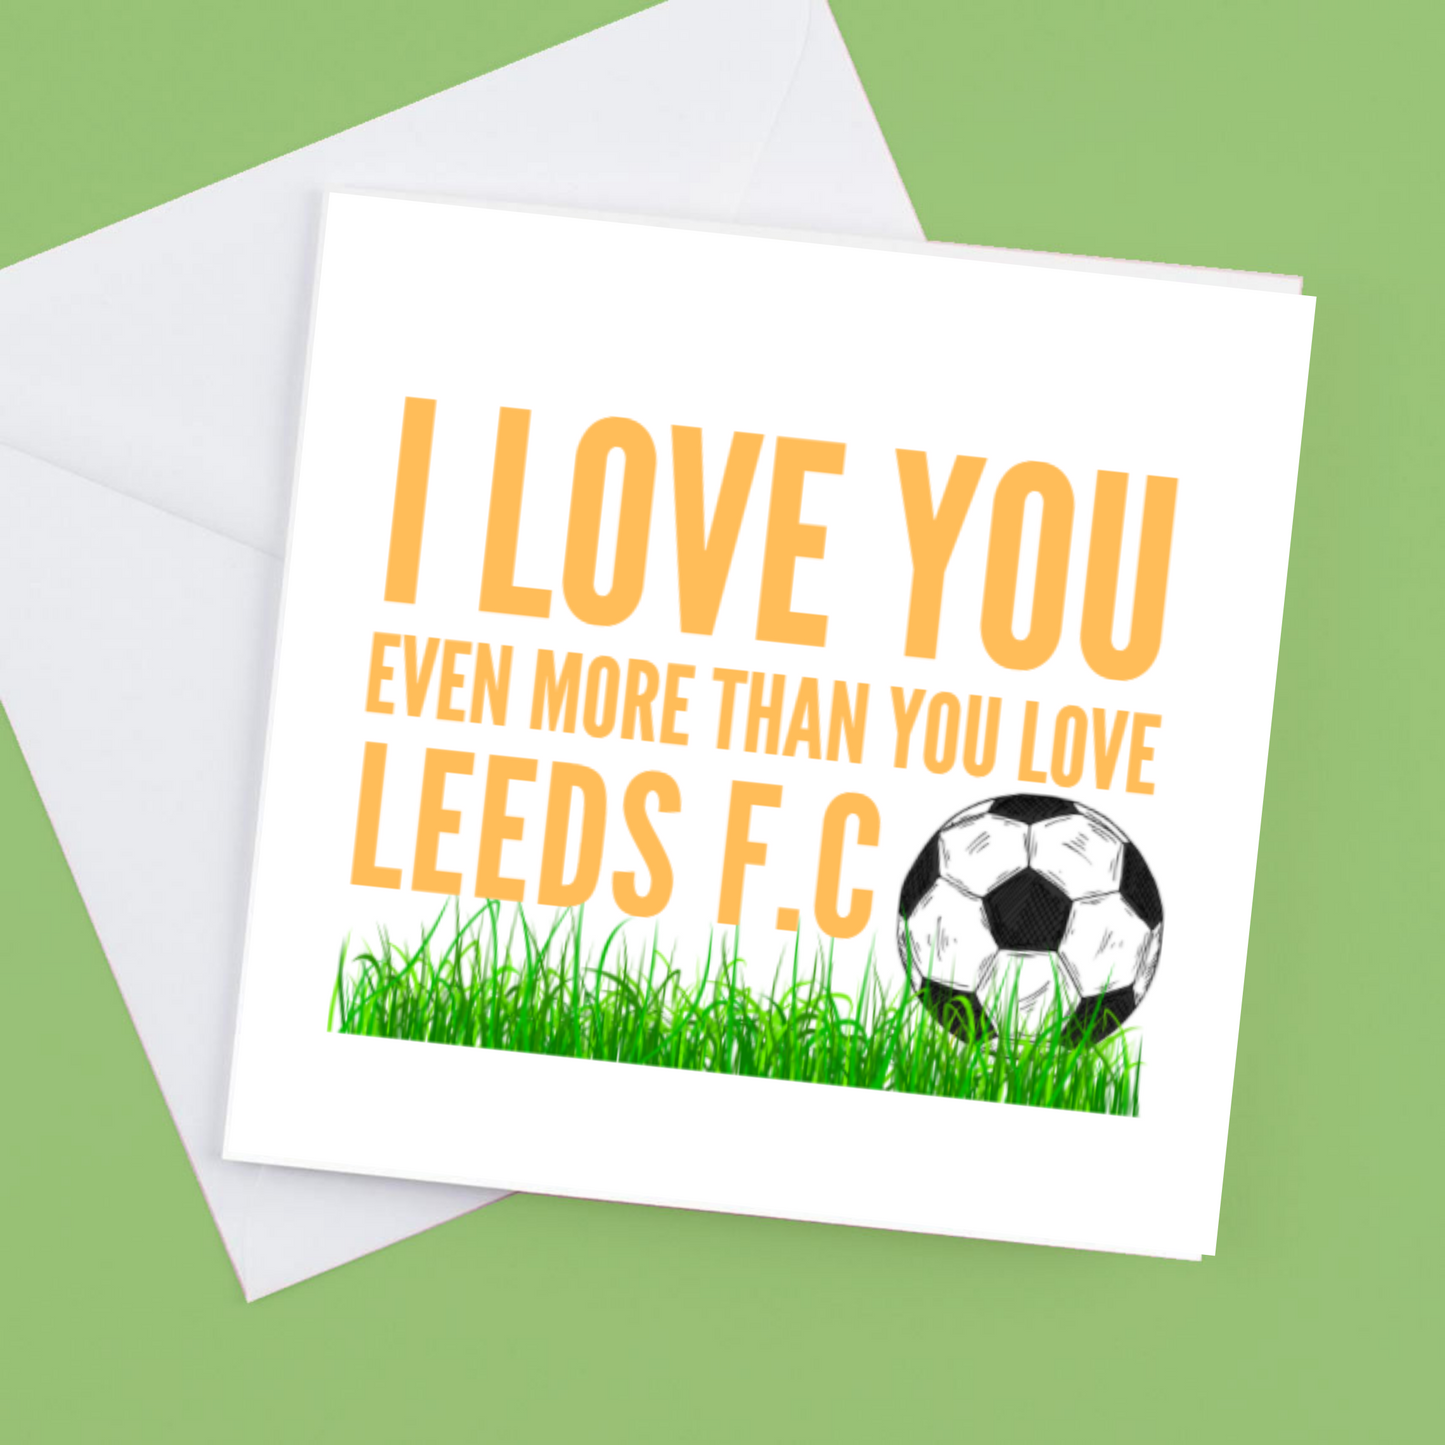 I Love you Even more than you love Leeds F.C.